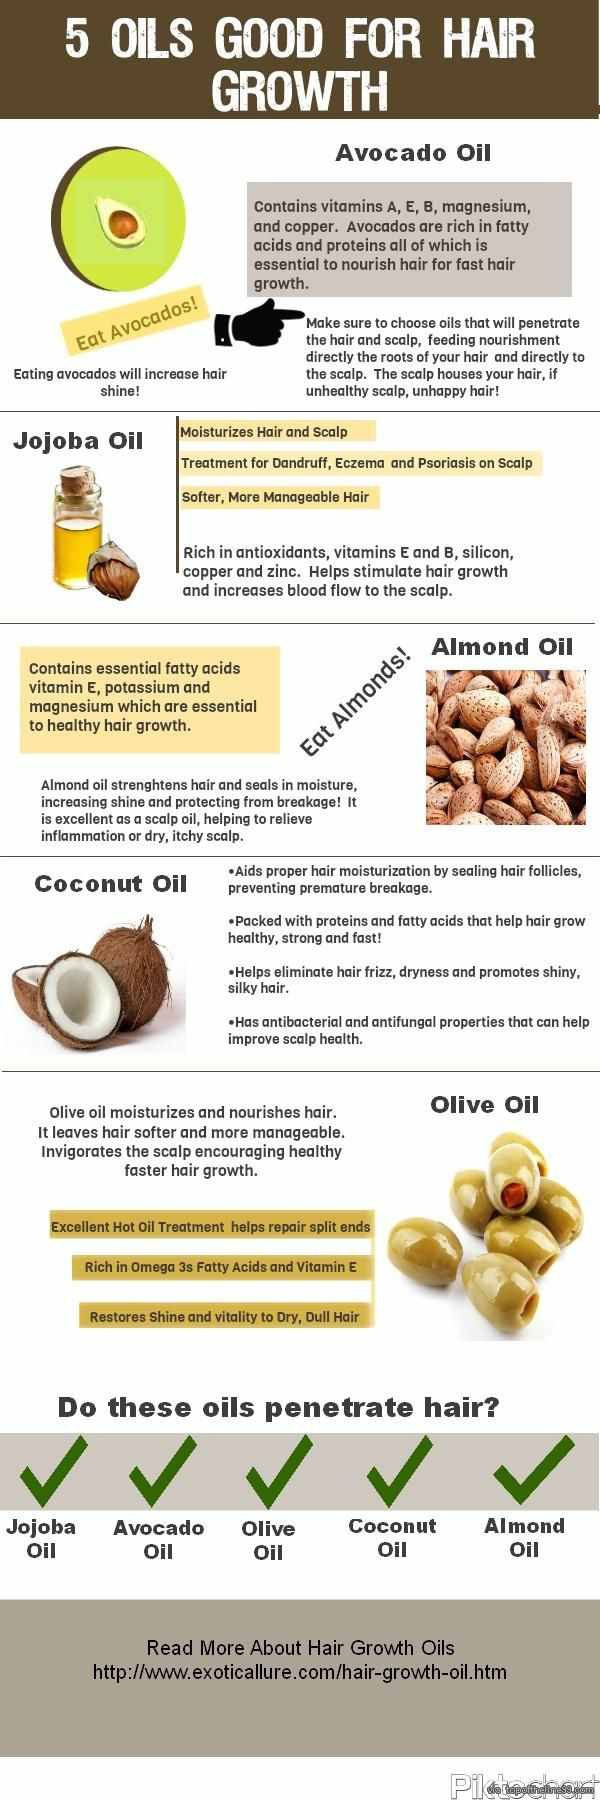 Top 5 Oils To Use For Hair Growth Infographic